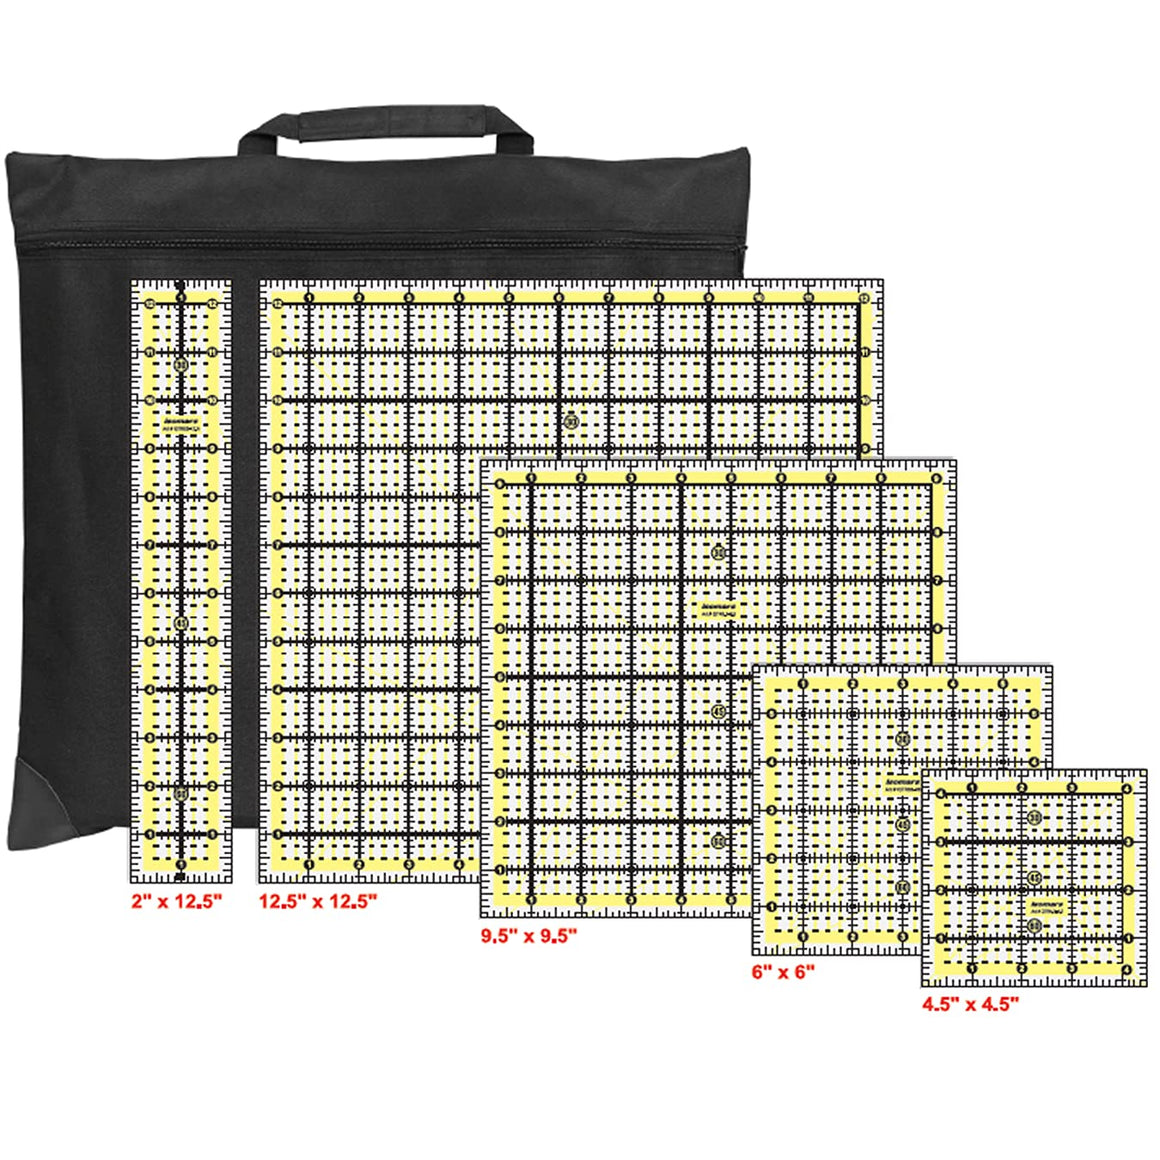 Isomars Quilting Ruler Set of 5 with Bag - 4.5" x 4.5", 6" x 6", 9.5" x 9.5", 12.5" x 12.5", 2" x 12.5"